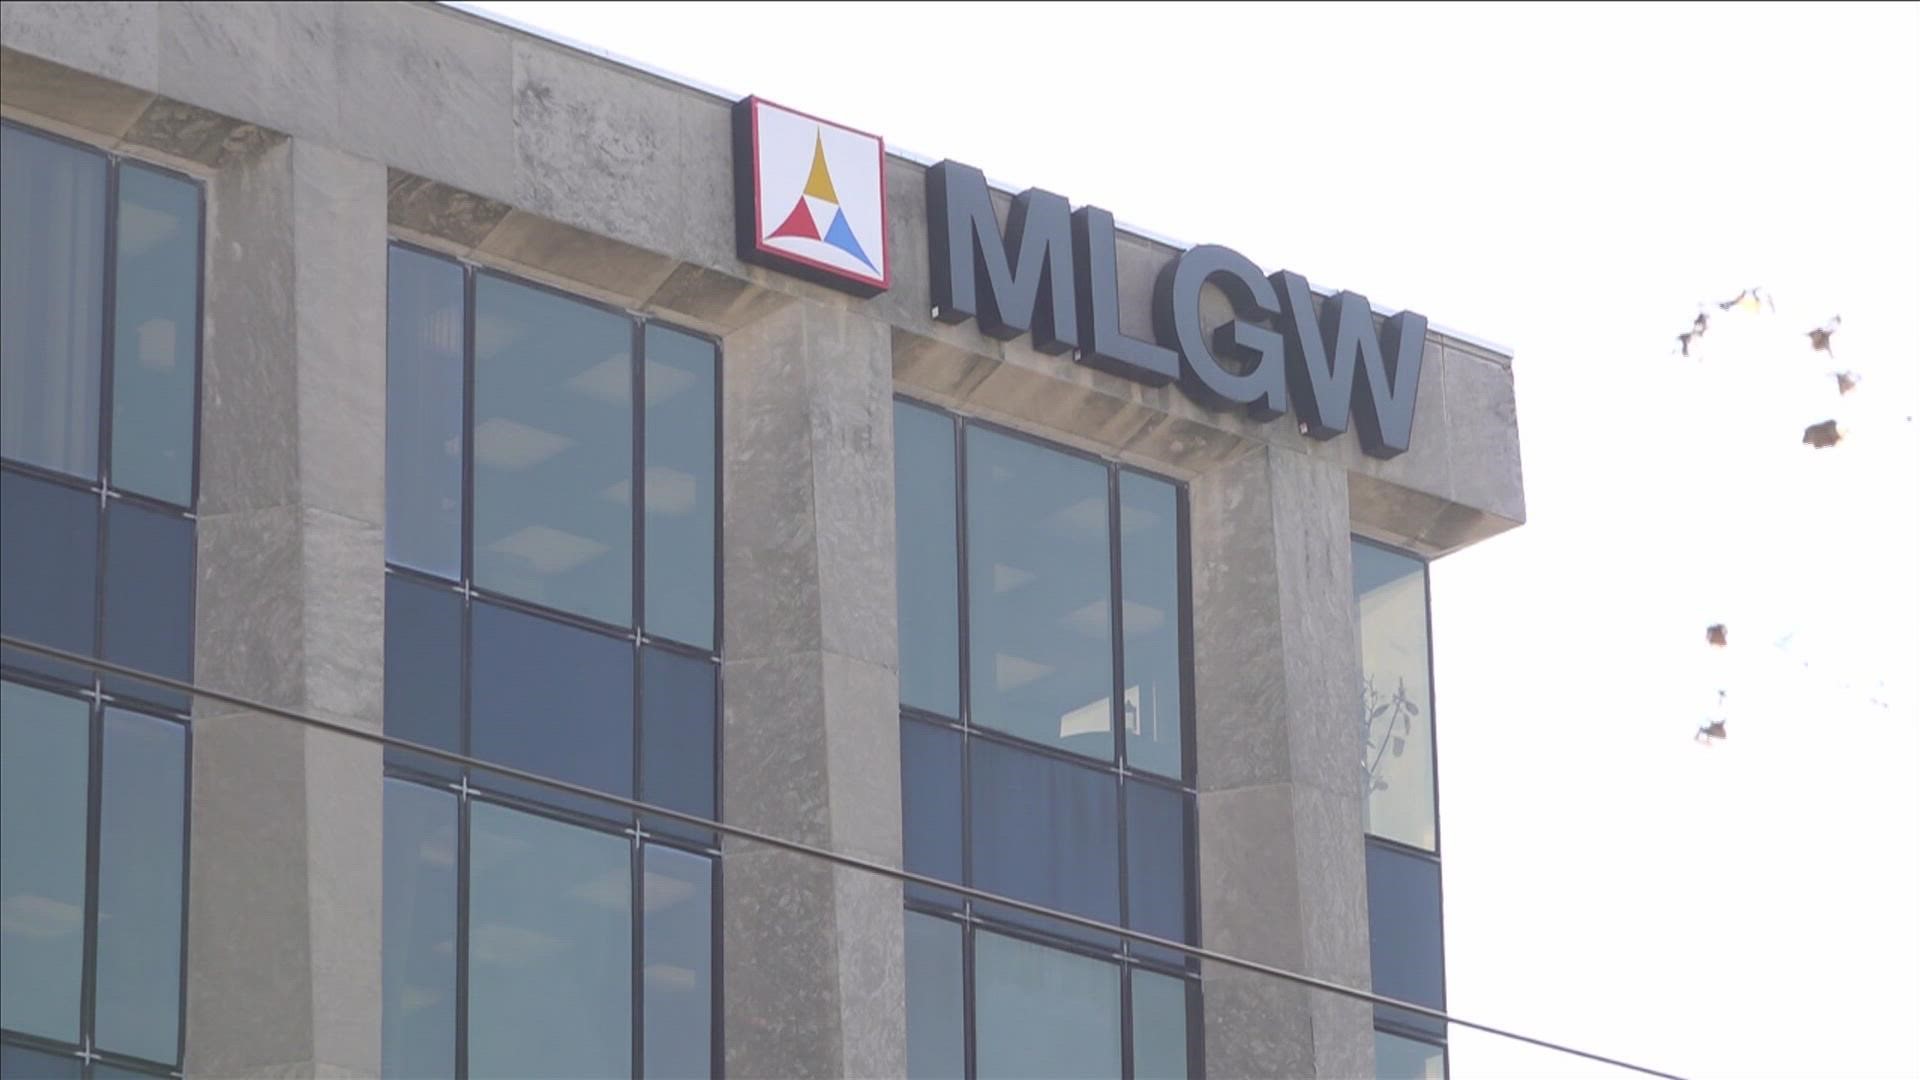 Tuesday was the day Memphis City Council members took their questions to MLGW executives.